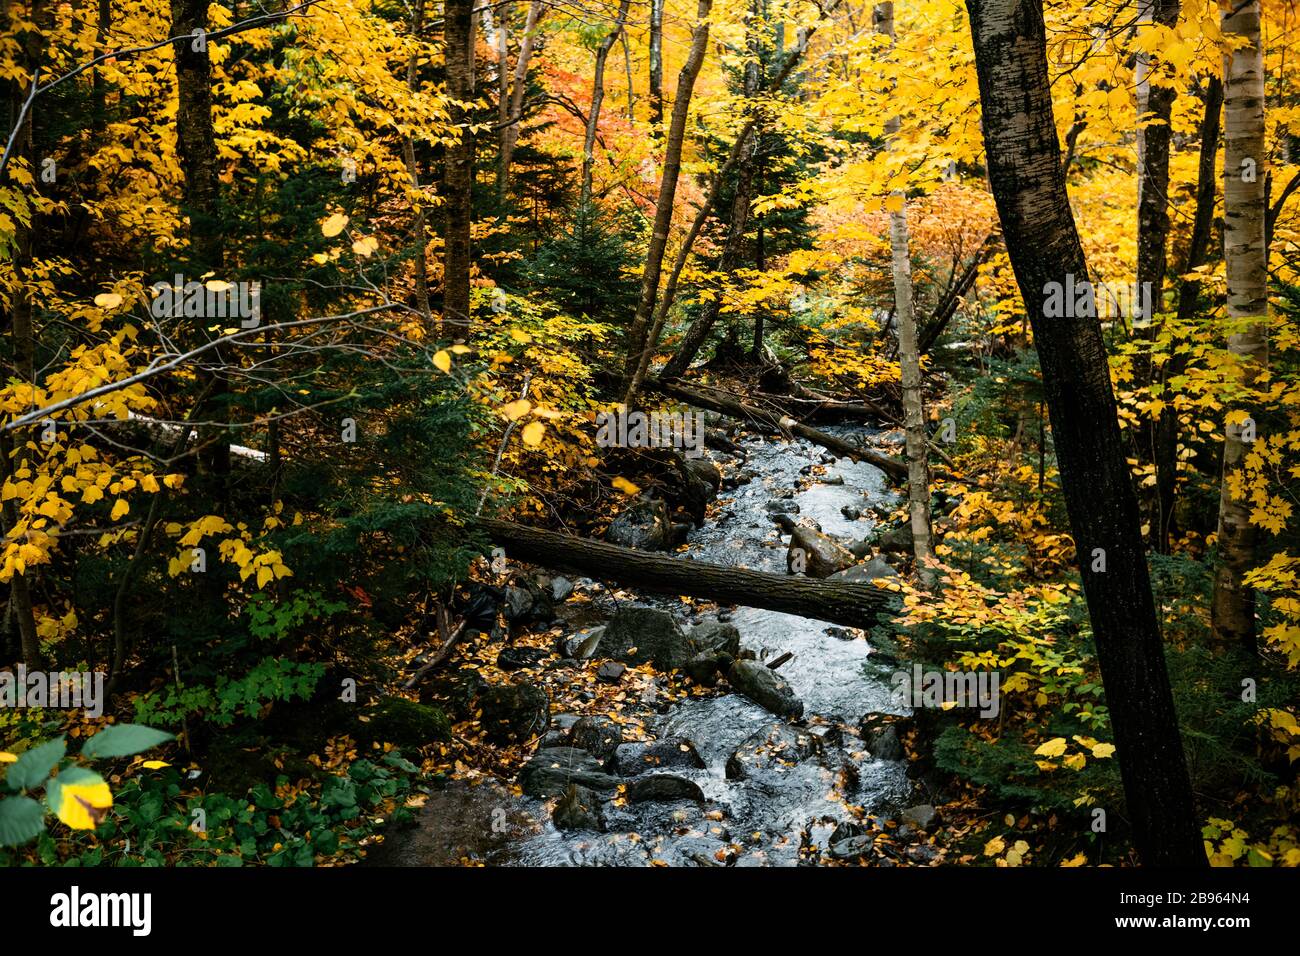 Tranquil stream runs through the middle of a colorful forest during peak autumn foliage. Stock Photo